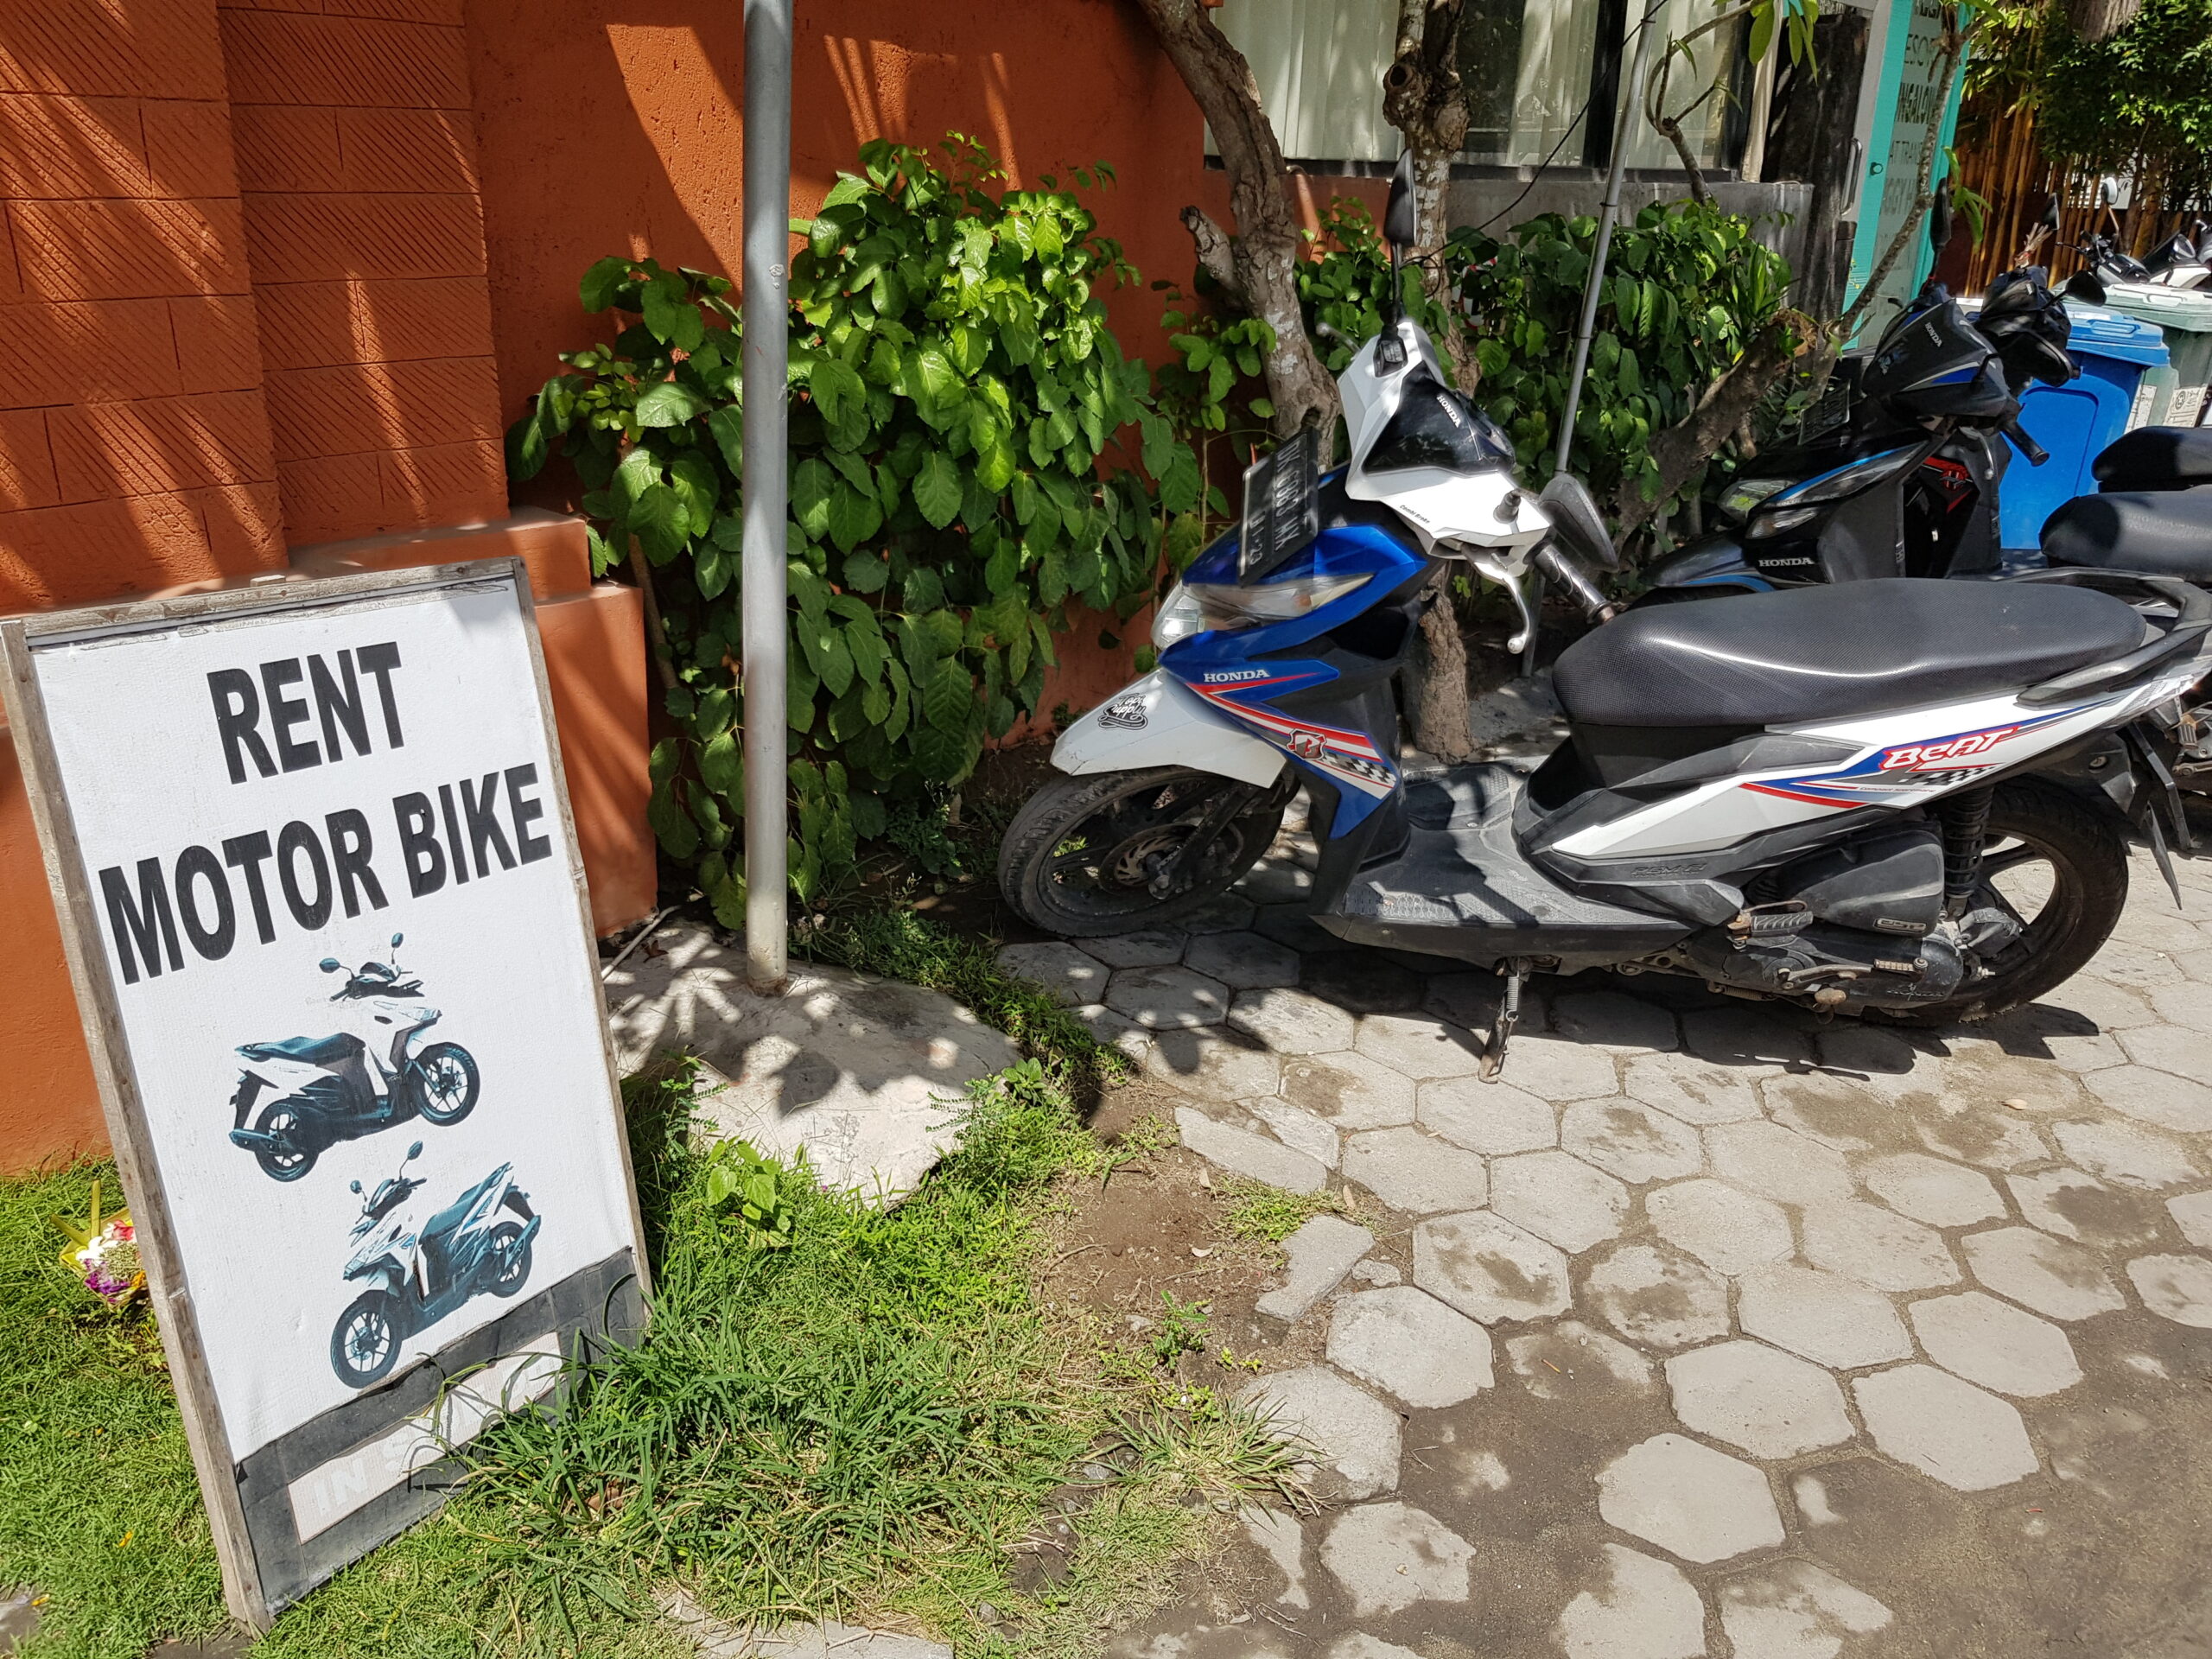 A motorcycle is parked next to a Rent Motor Bike sign.